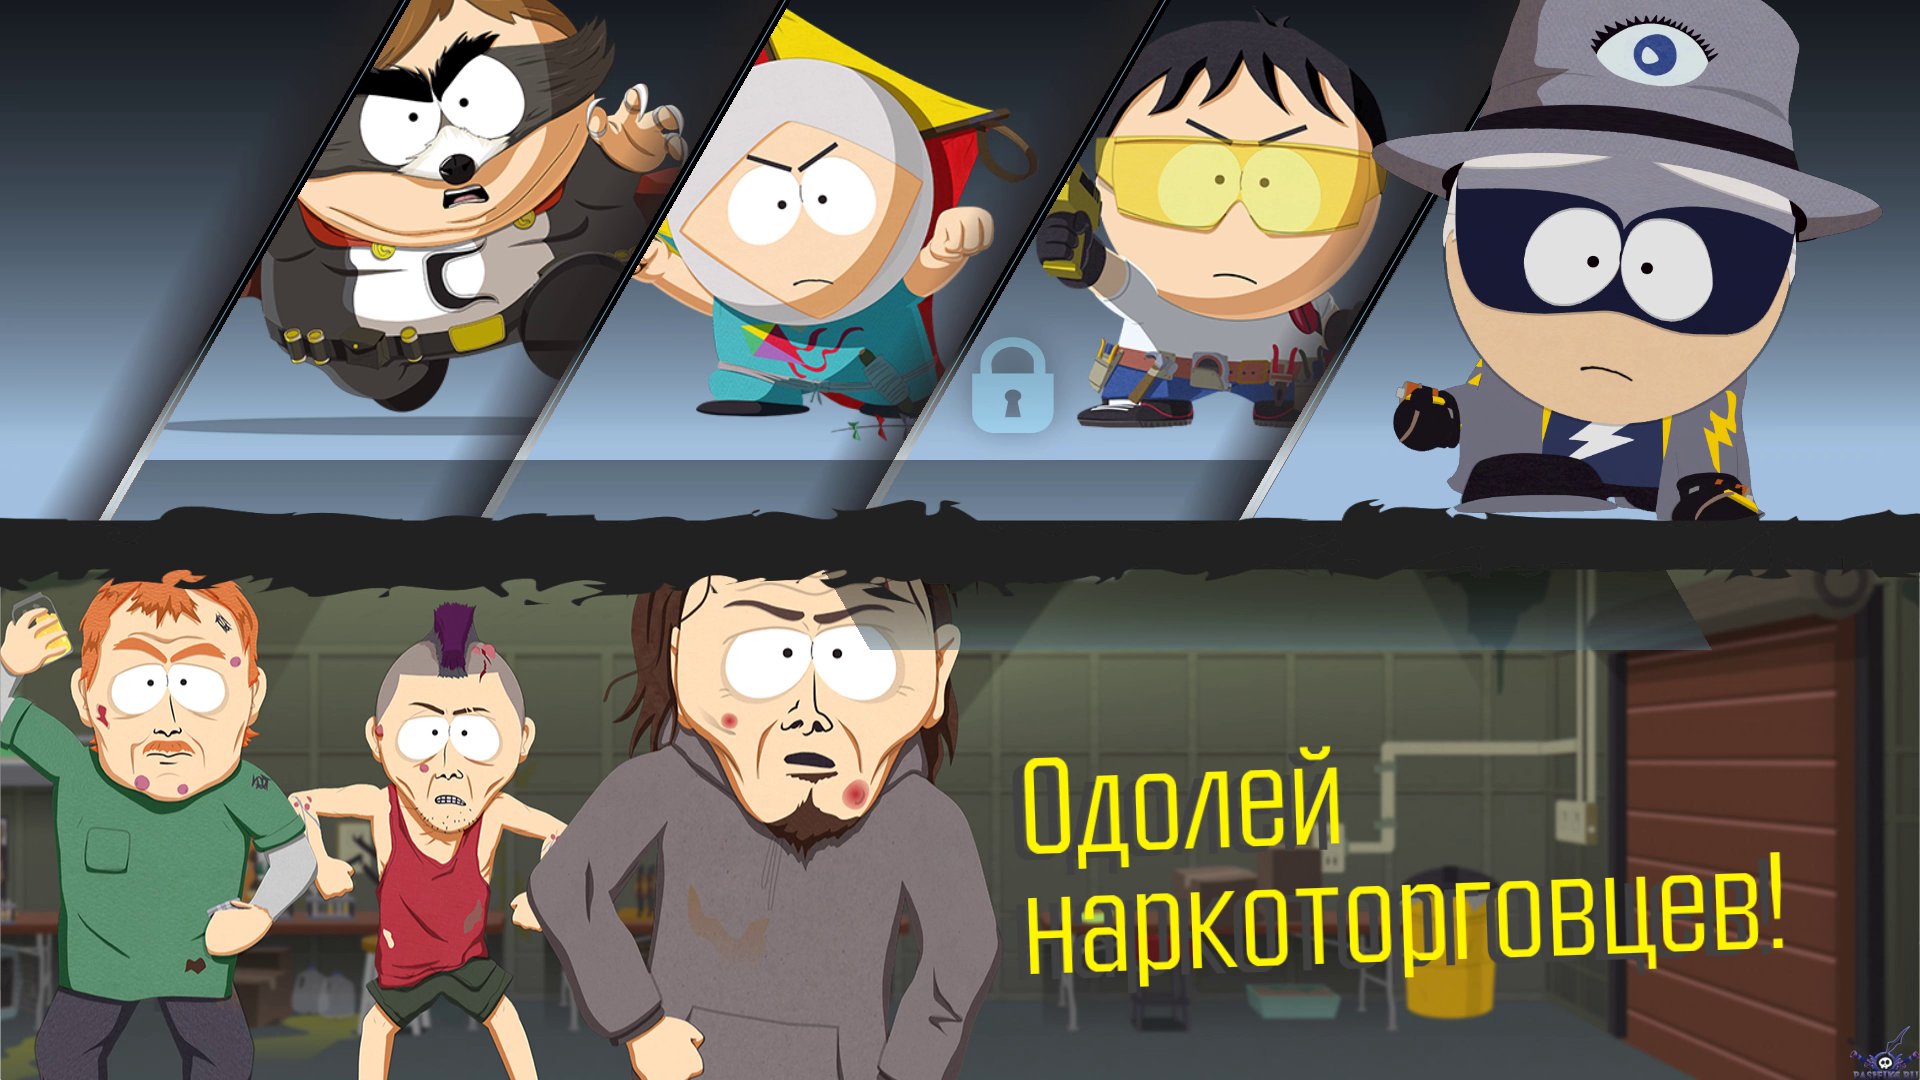 South park the fractured but whole купить ключ steam дешево фото 81